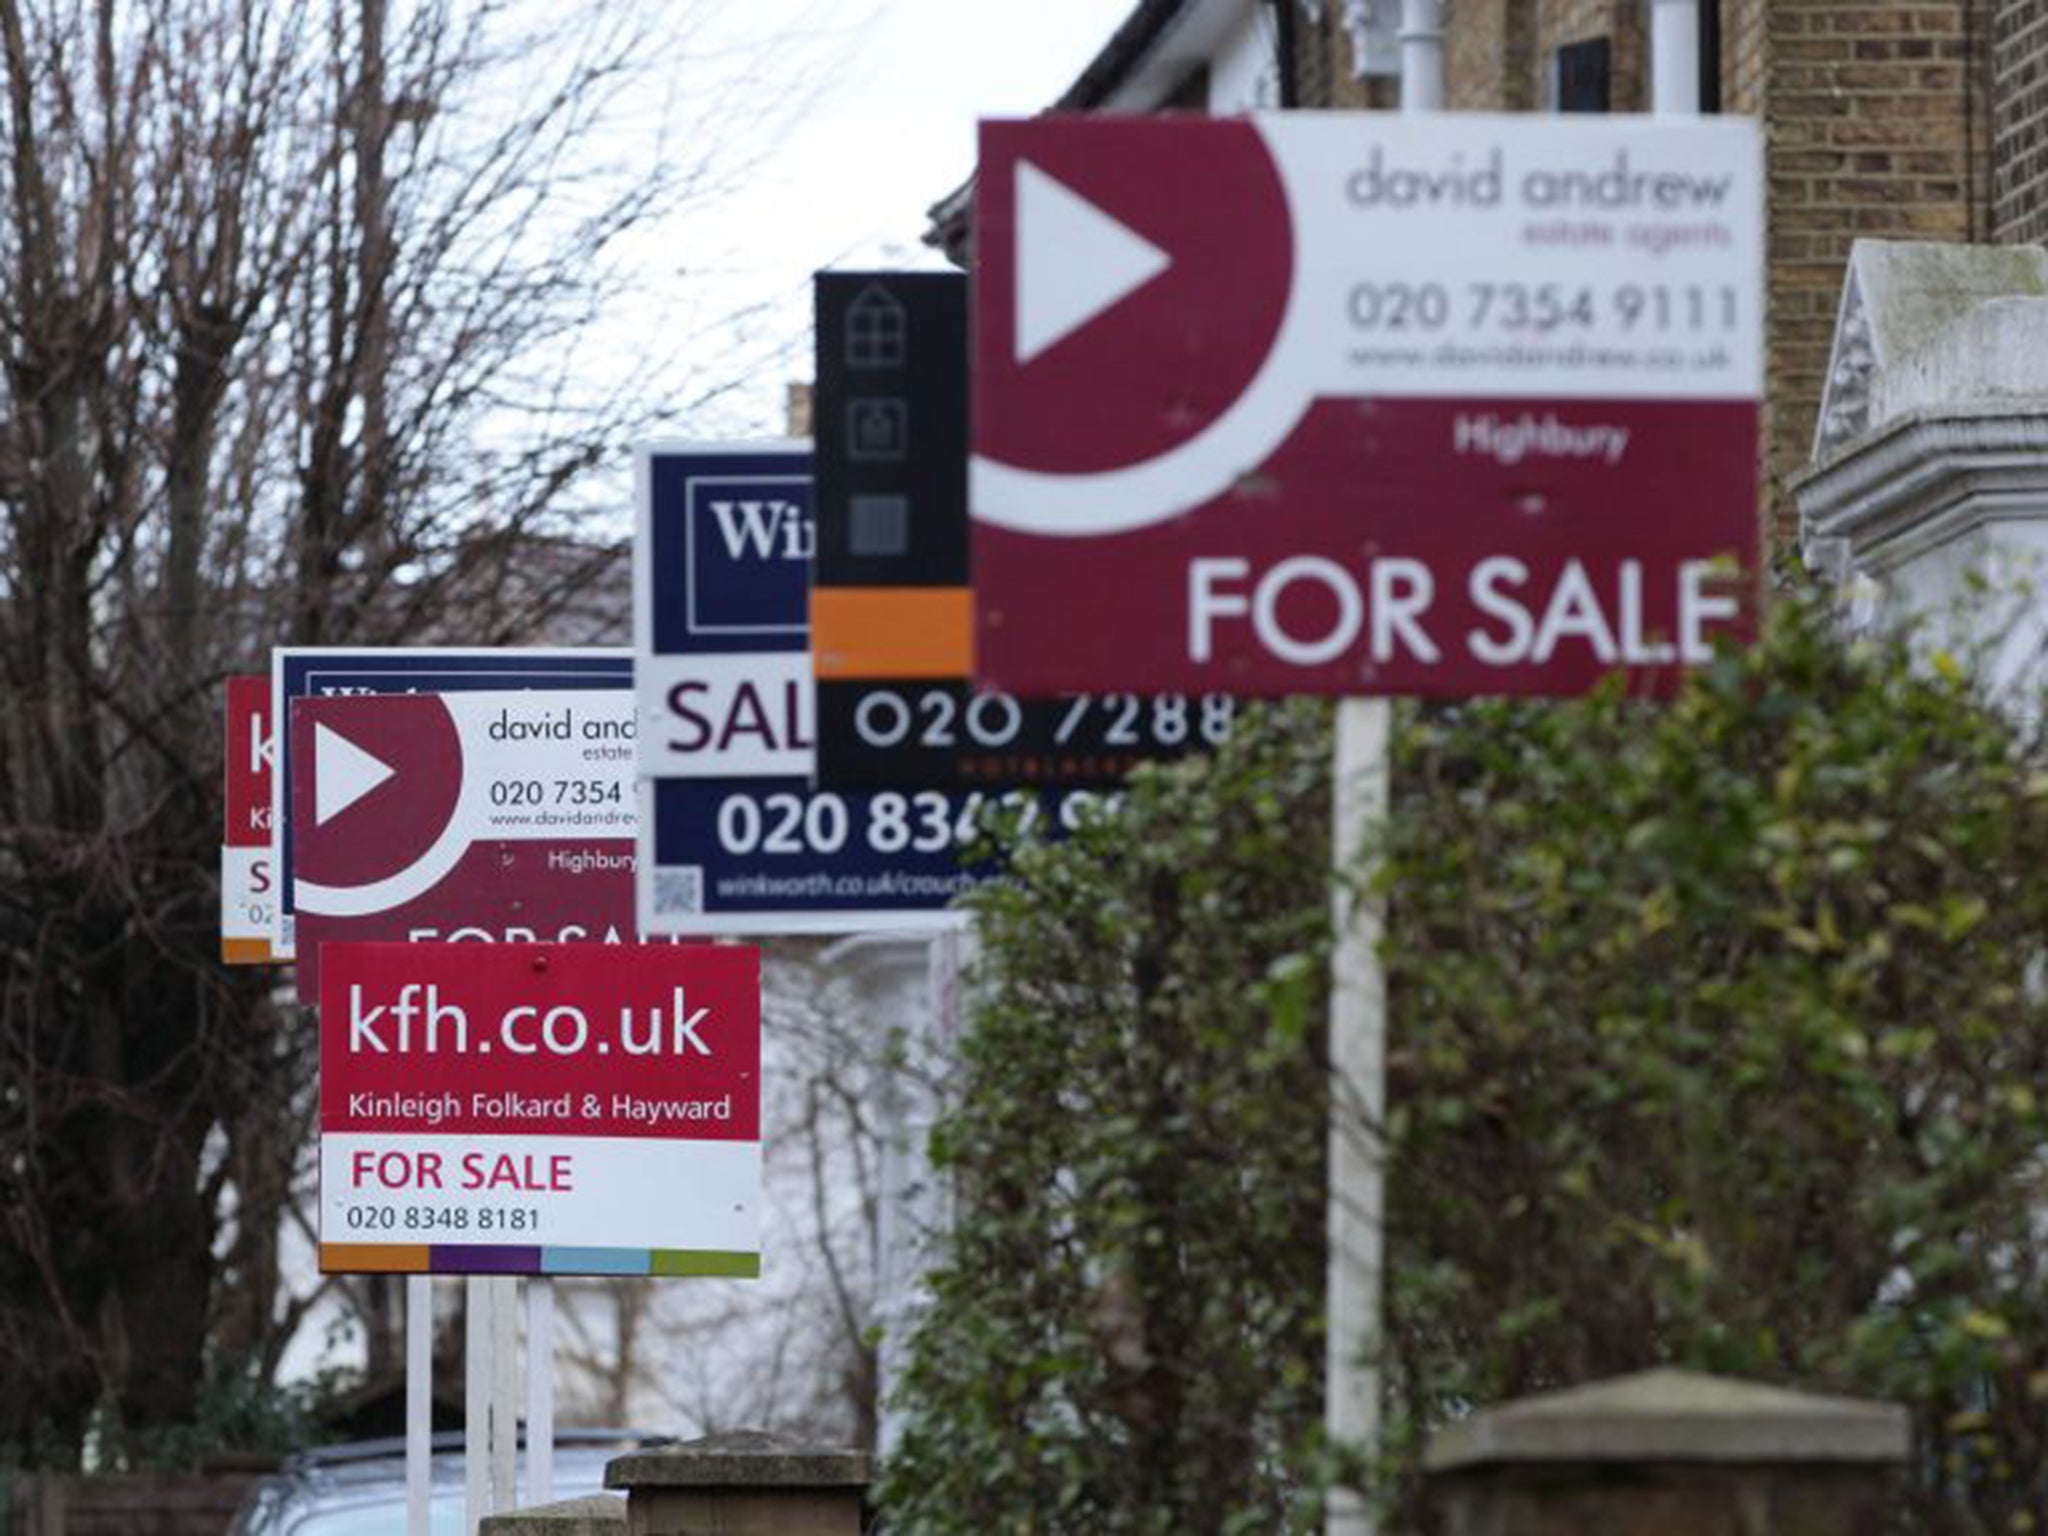 Property prices are being forced up because there are not enough homes to satisfy demand